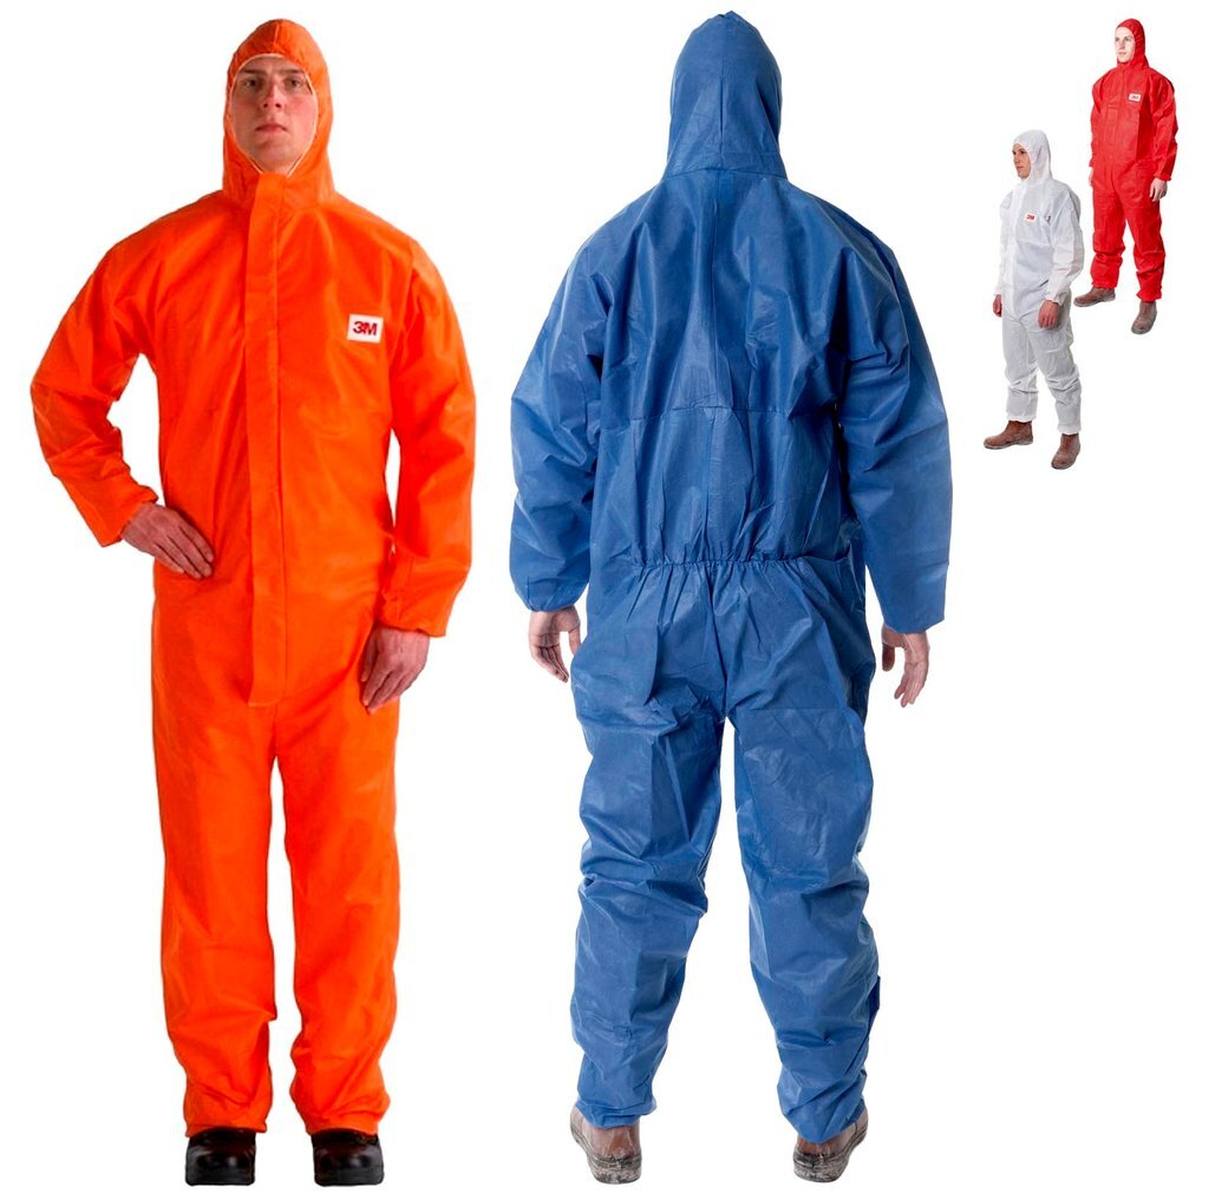 3M 4515B coverall, blue, TYPE 5/6, size 2XL, material SMMS low-linting, elasticated cuffs